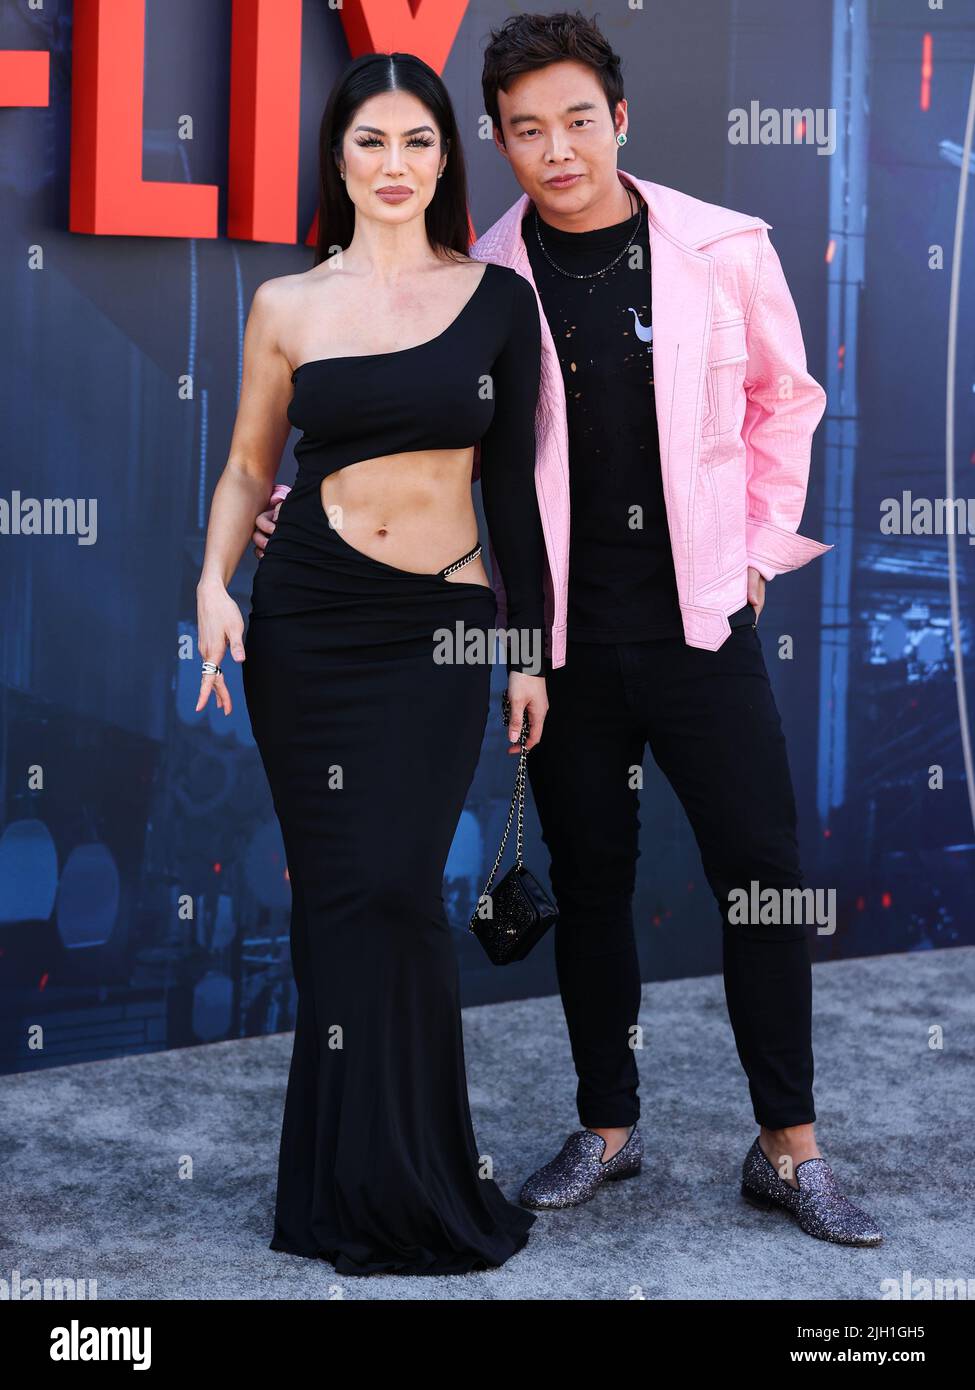 Hollywood, United States. 13th July, 2022. HOLLYWOOD, LOS ANGELES, CALIFORNIA, USA - JULY 13: American actress Kim Lee and Kane Lim arrive at the World Premiere Of Netflix's 'The Gray Man' held at the TCL Chinese Theatre IMAX on July 13, 2022 in Hollywood, Los Angeles, California, United States. (Photo by Xavier Collin/Image Press Agency) Credit: Image Press Agency/Alamy Live News Stock Photo